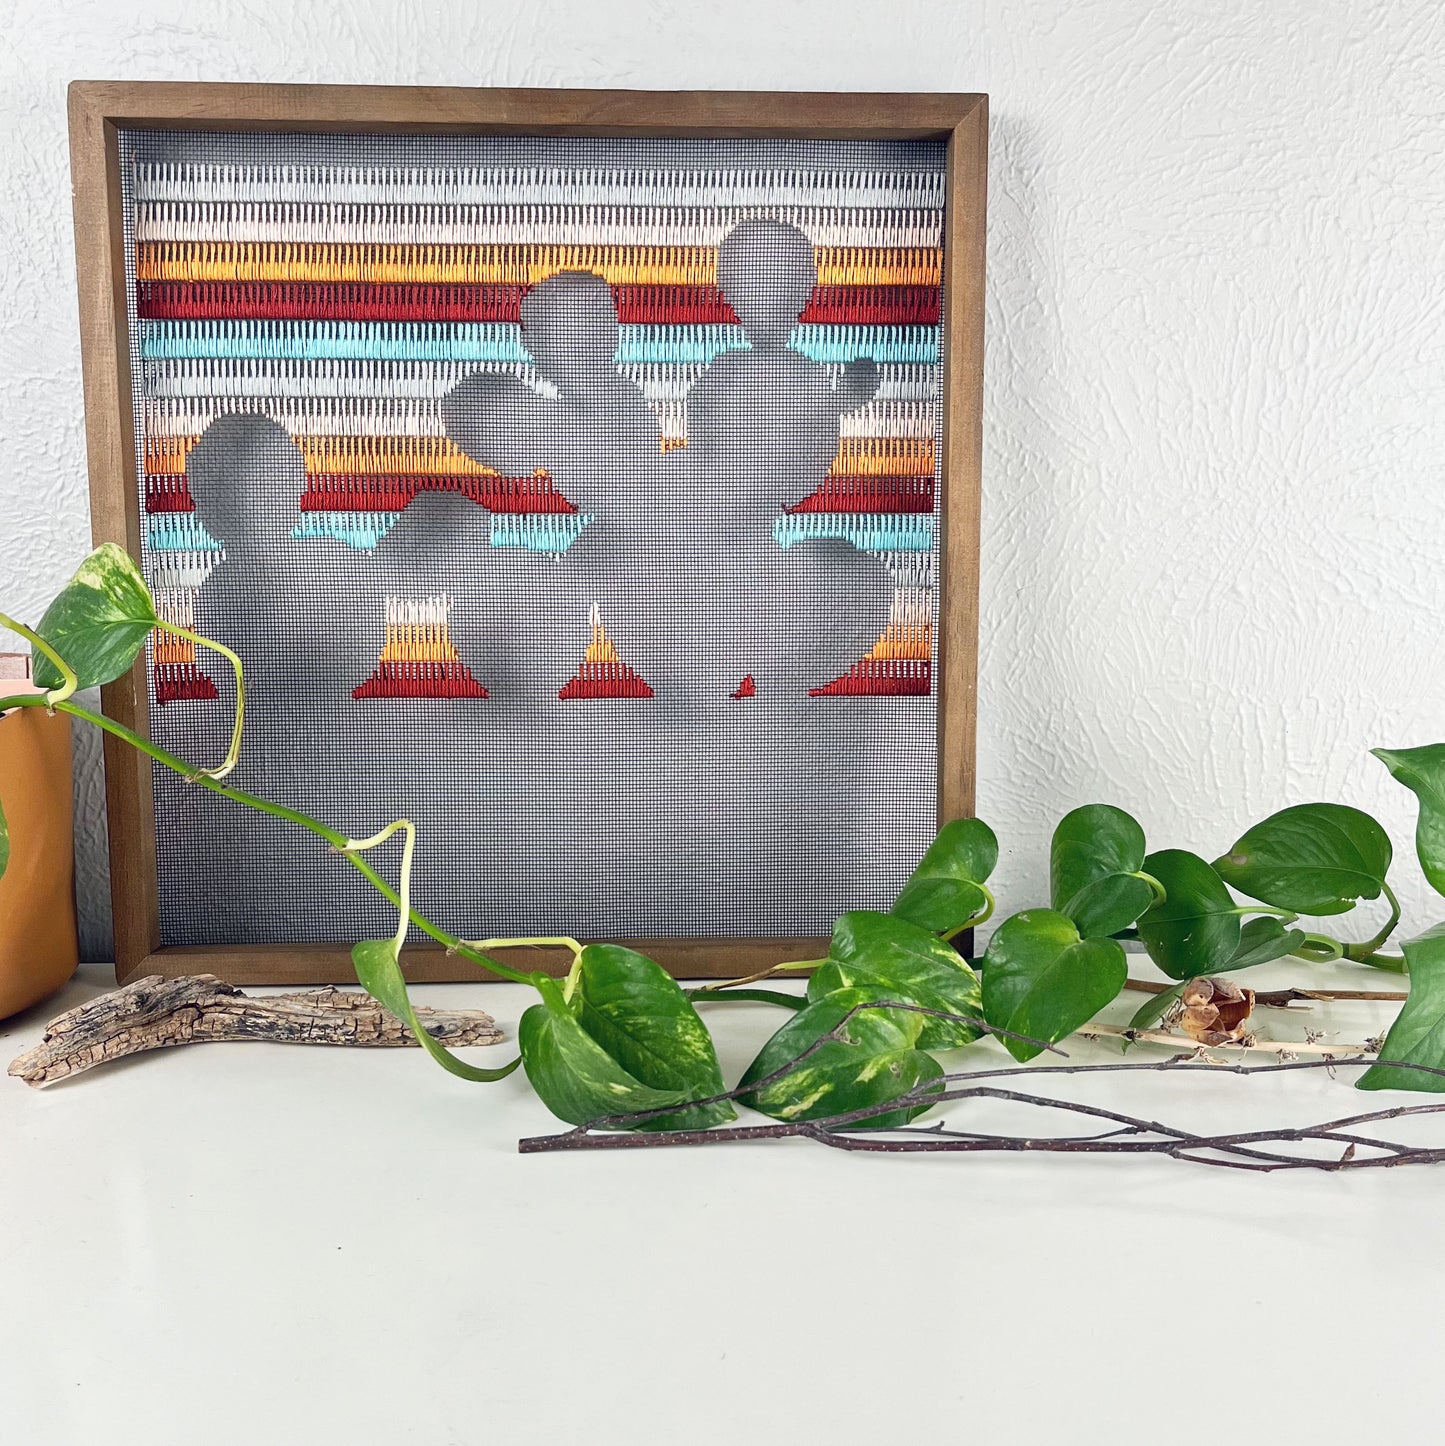 close up view of a piece of window screen hand stitched with rows of maroon orange peach grey and aqua blue stitches with an image in negative space of a prickly pear cactus, in a square wood frame, on a white counter, with a pothos vine around it